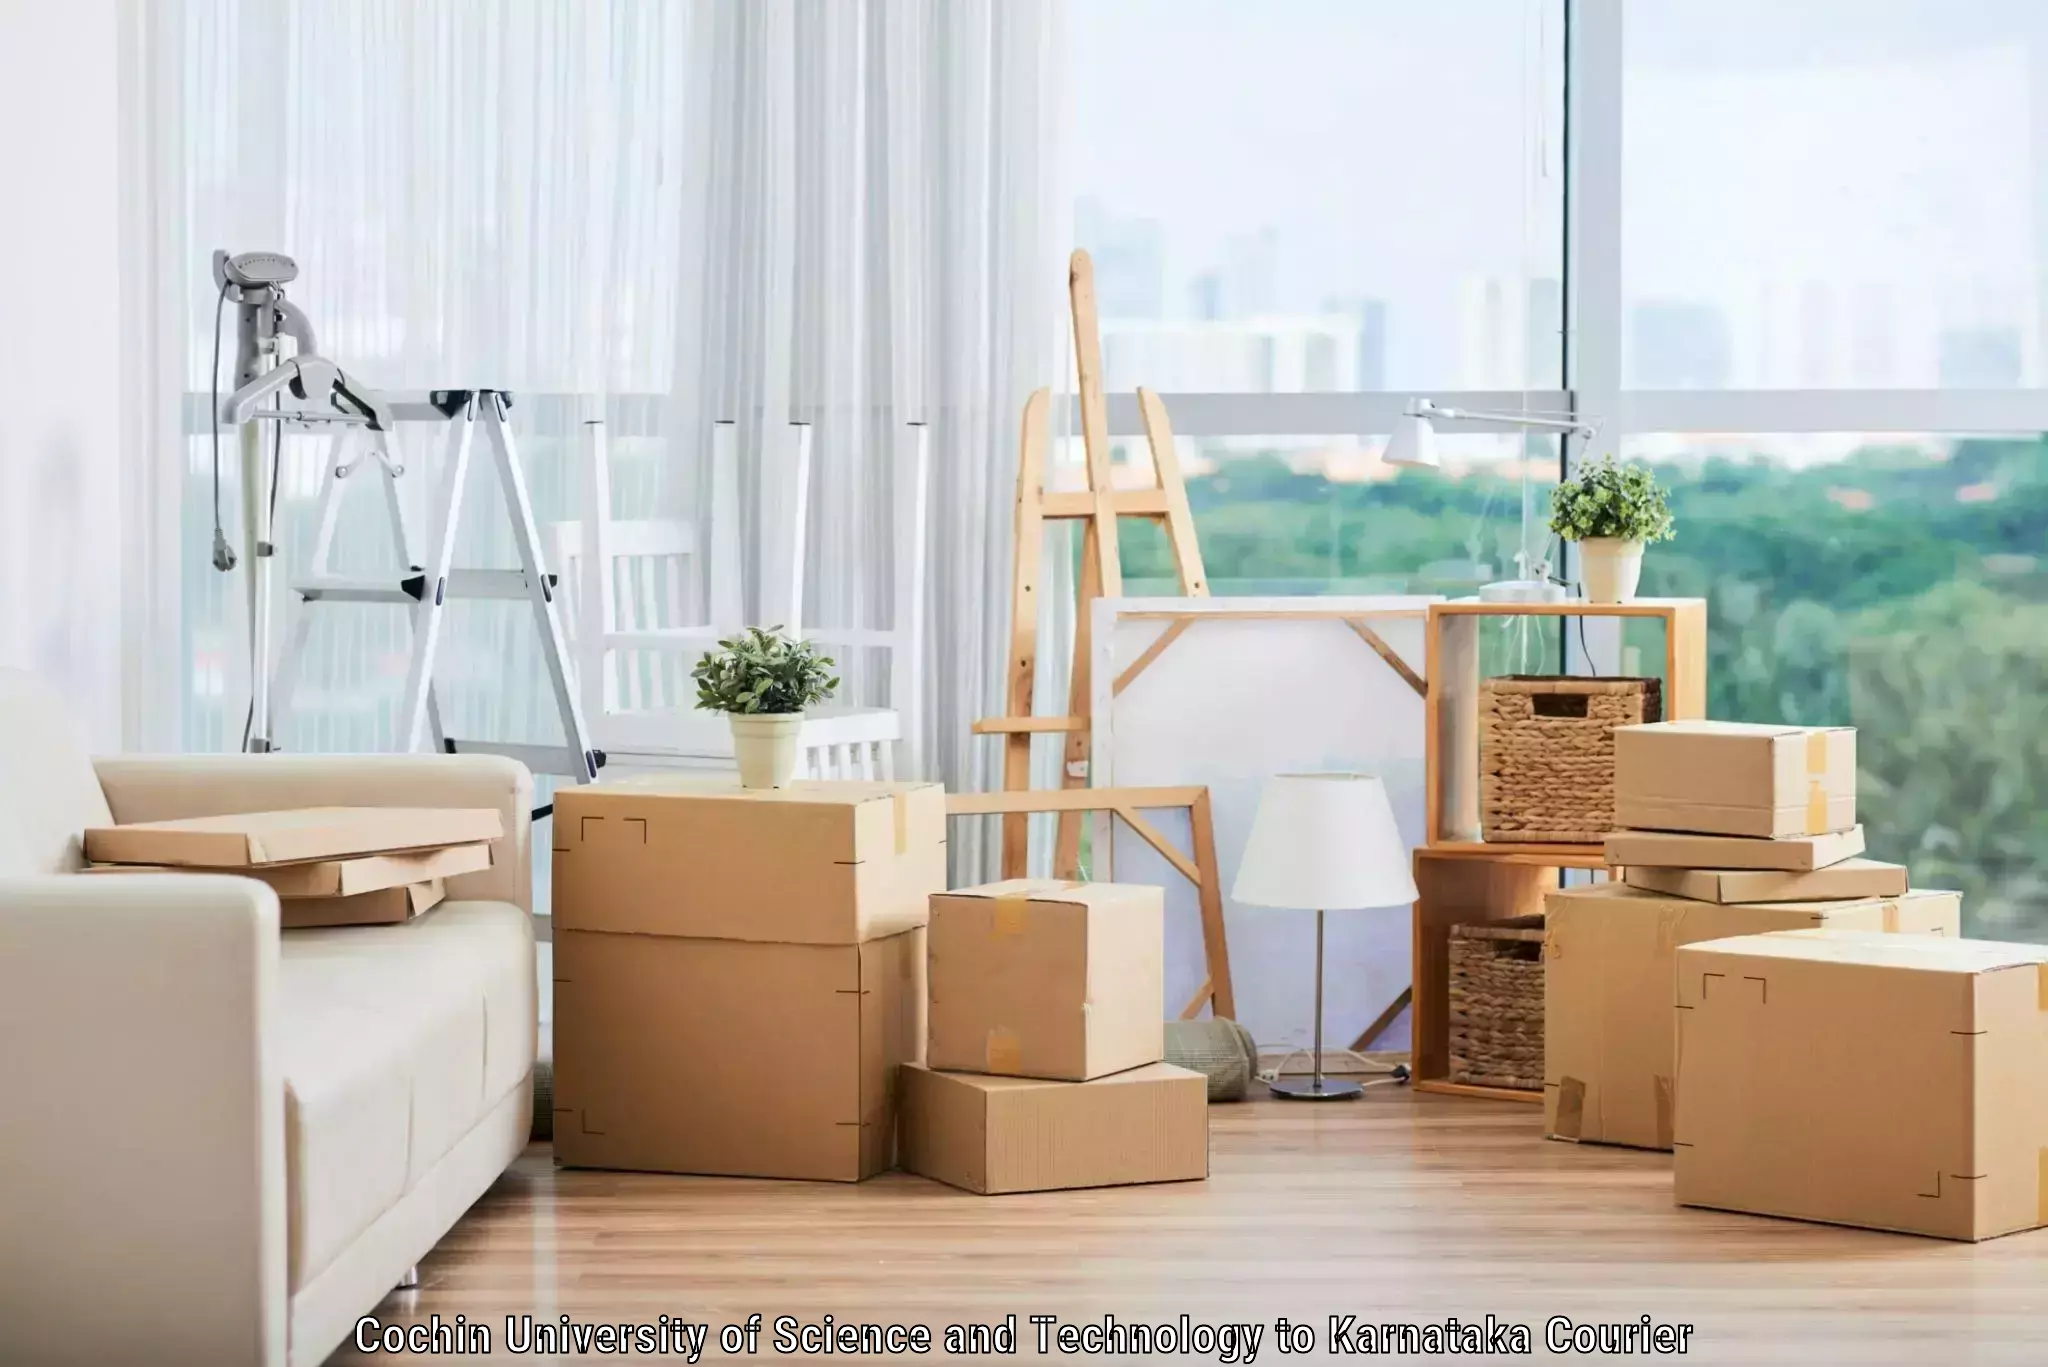 Reliable furniture movers in Cochin University of Science and Technology to Mangalore